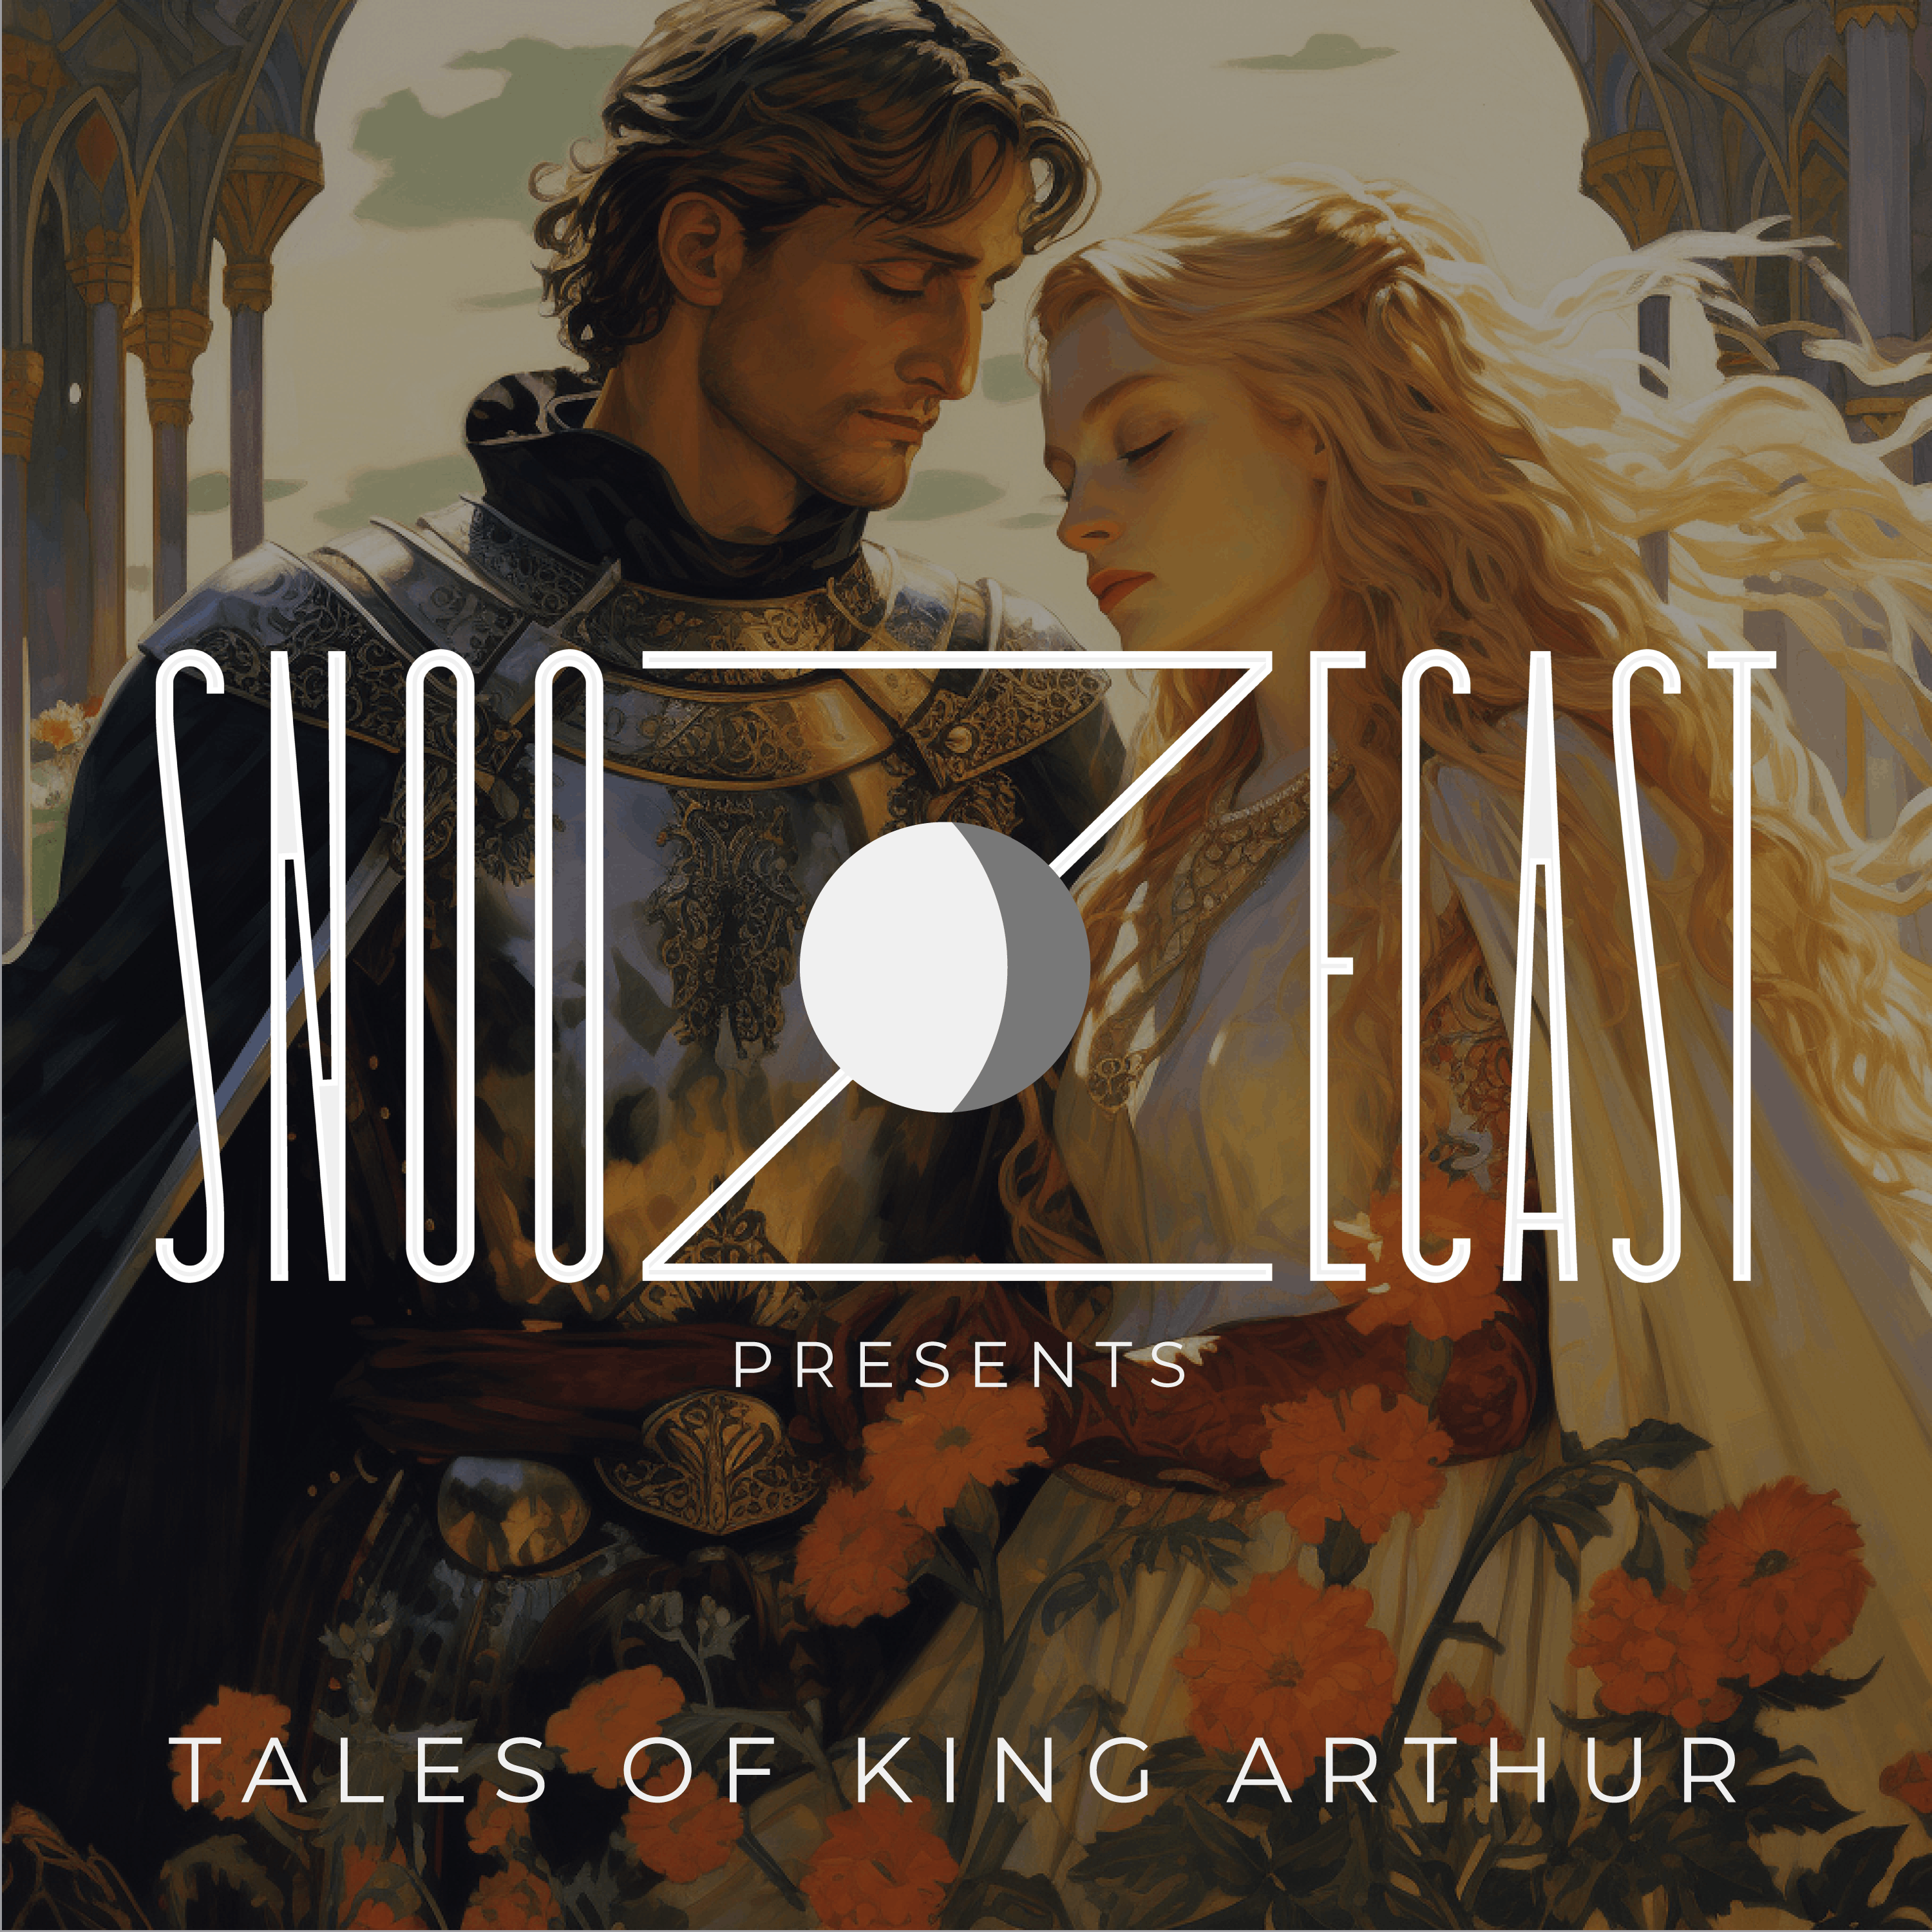 Snoozecast+ Deluxe: Tales of King Arthur podcast tile